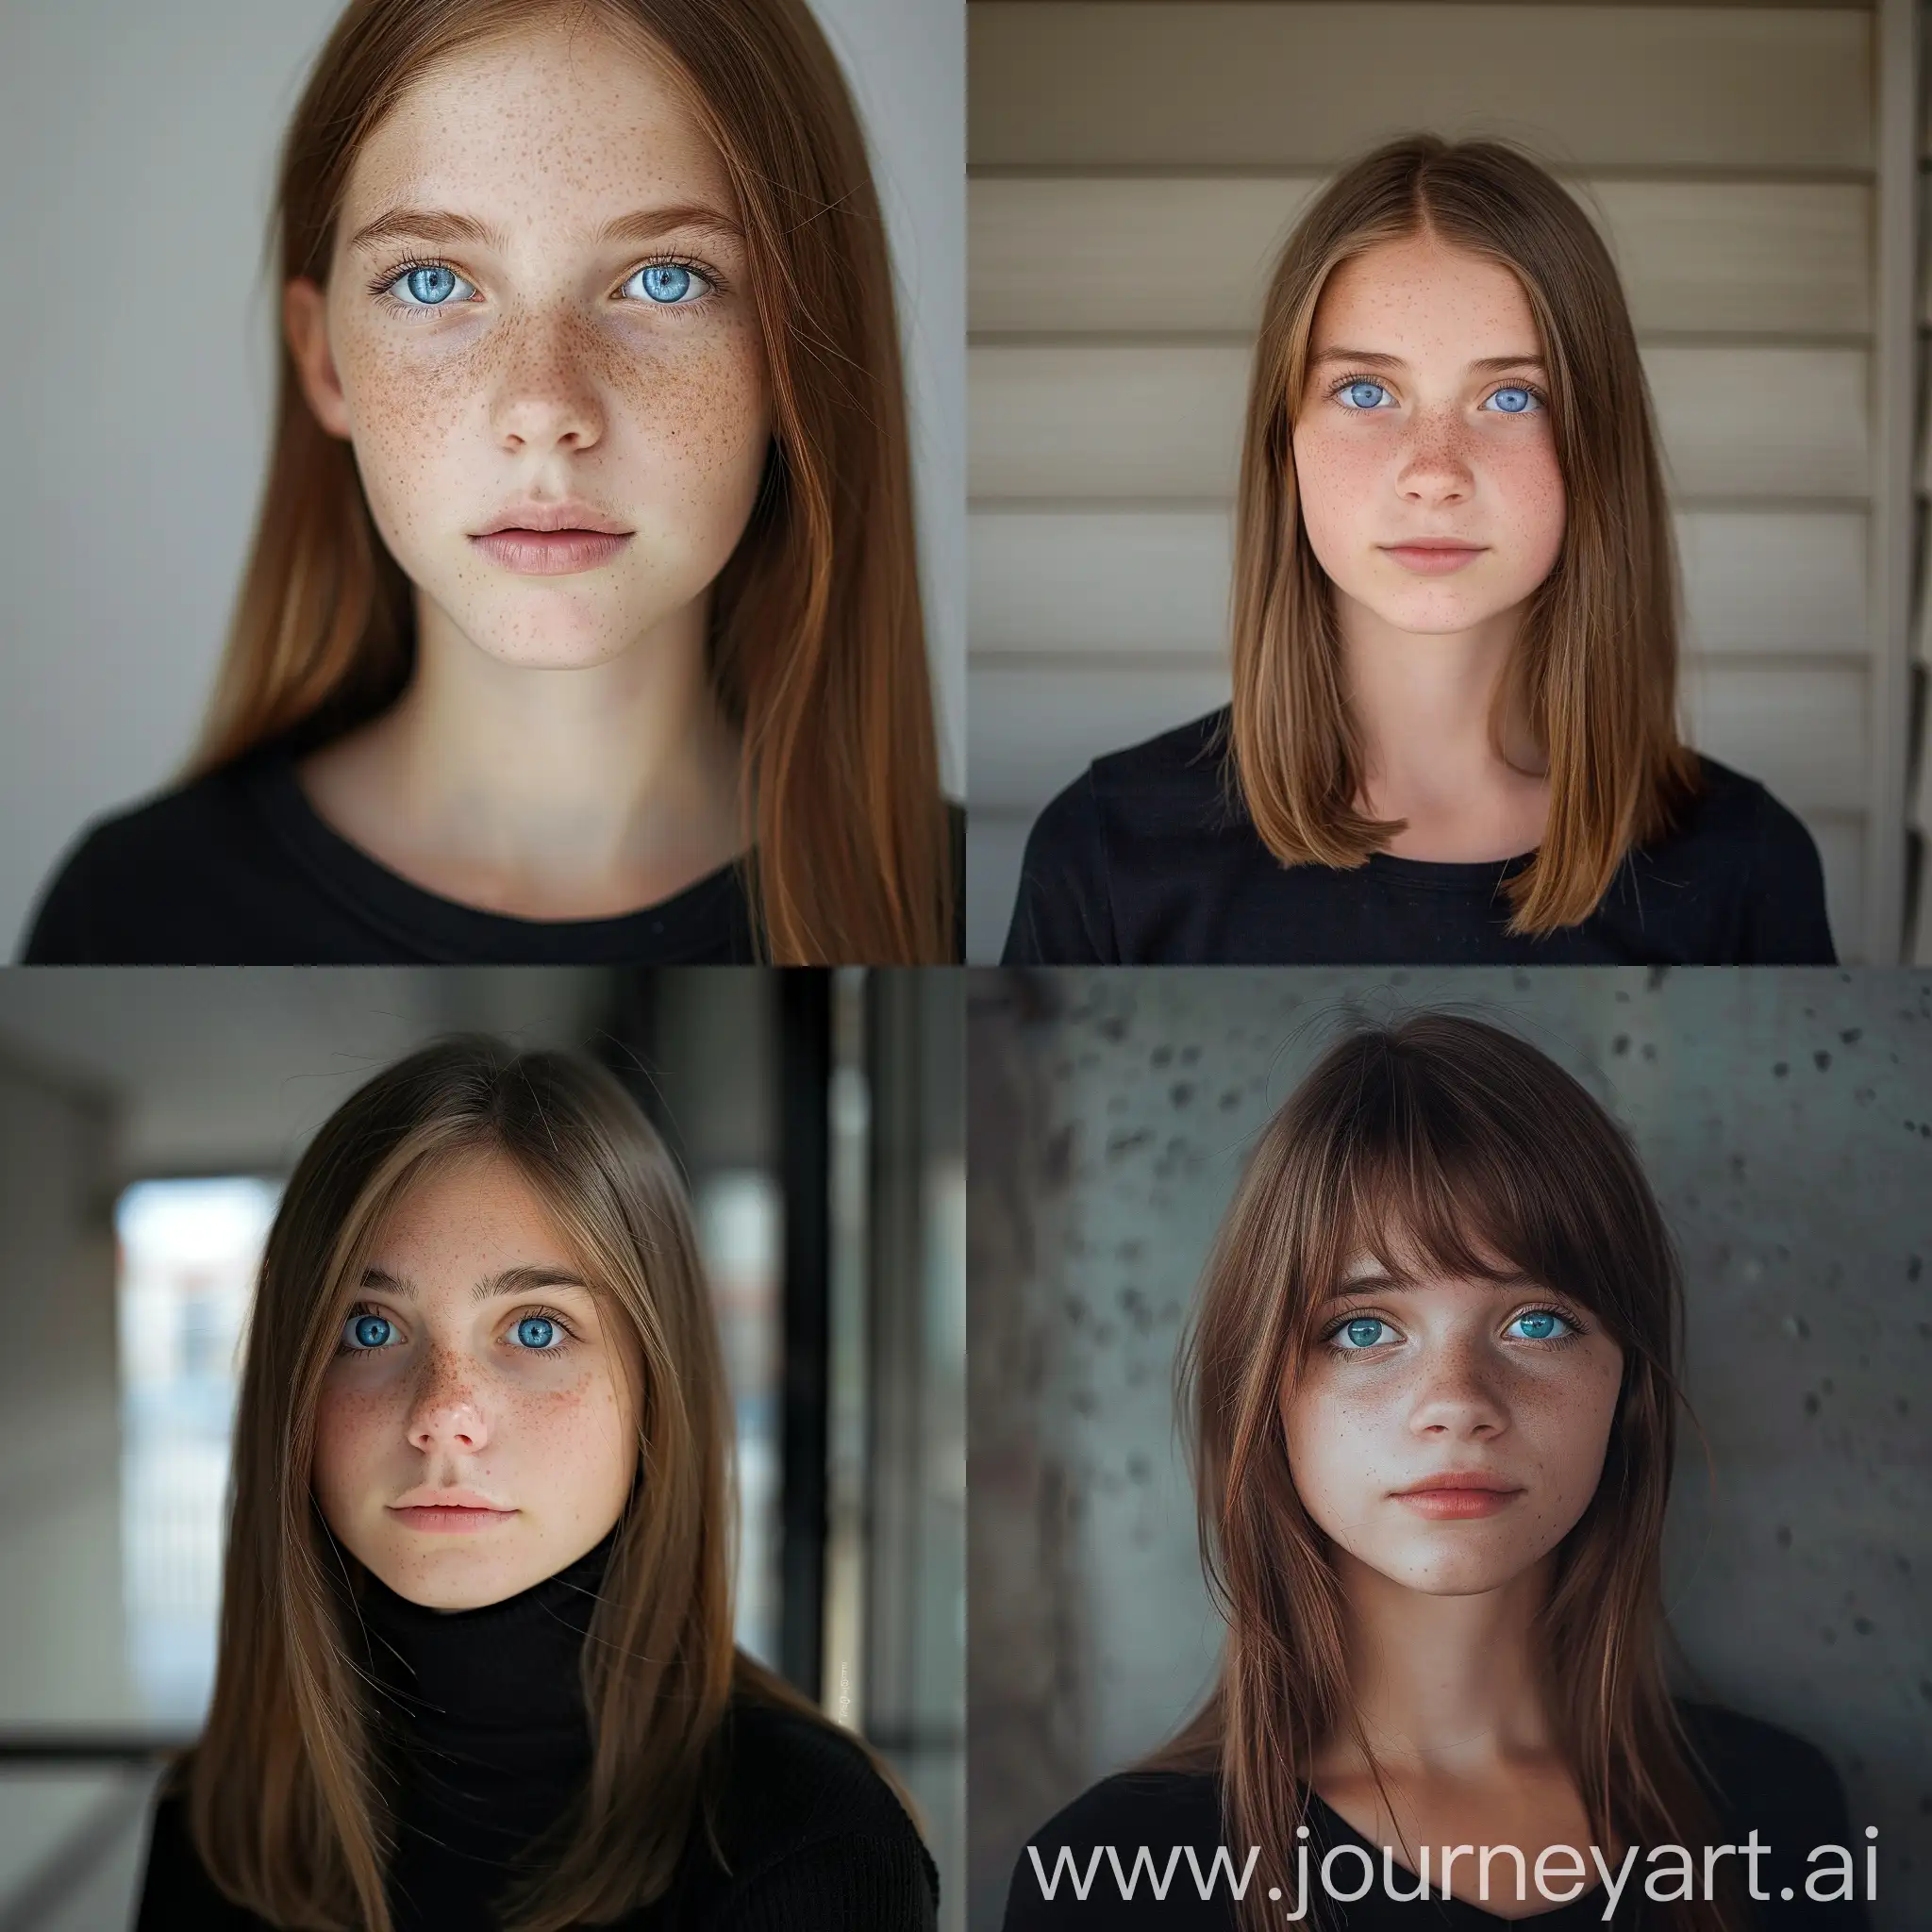 Portrait-of-a-Girl-with-Striking-Blue-Eyes-and-Straight-Hair